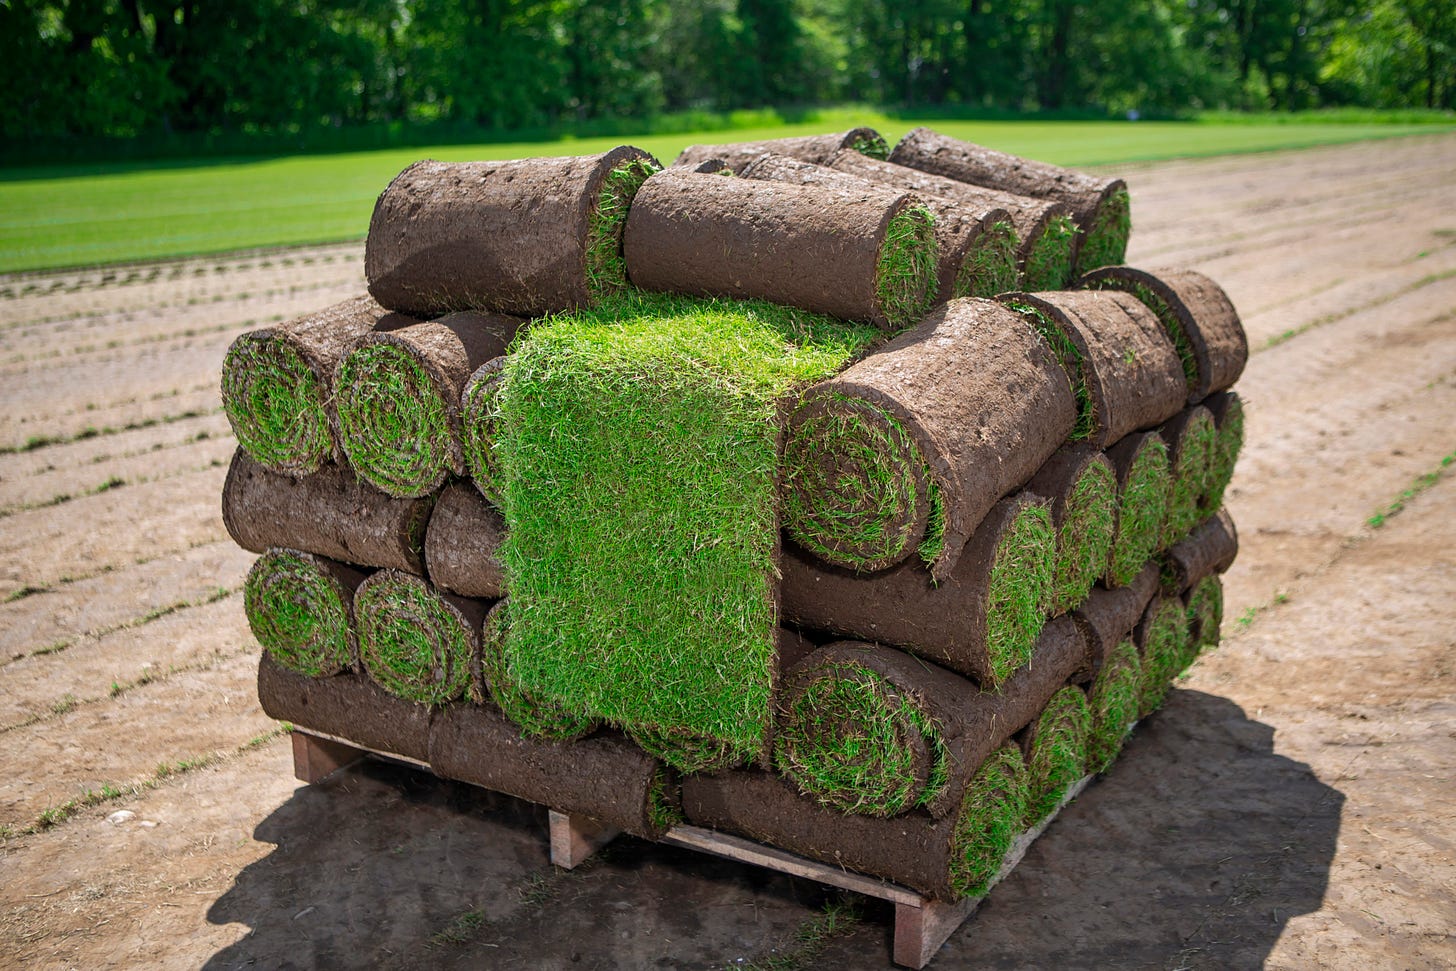 A square wooden pallet with 68 rolls of grass terf stacked on it in four layers of 15 and 8 on the top layer. One roll is half unrolled with a grass layer hanging down the front like a tongue. The pallet sites on a field of dirt where the layers were removed. You can see a grass field and the bottom of trees in the background.